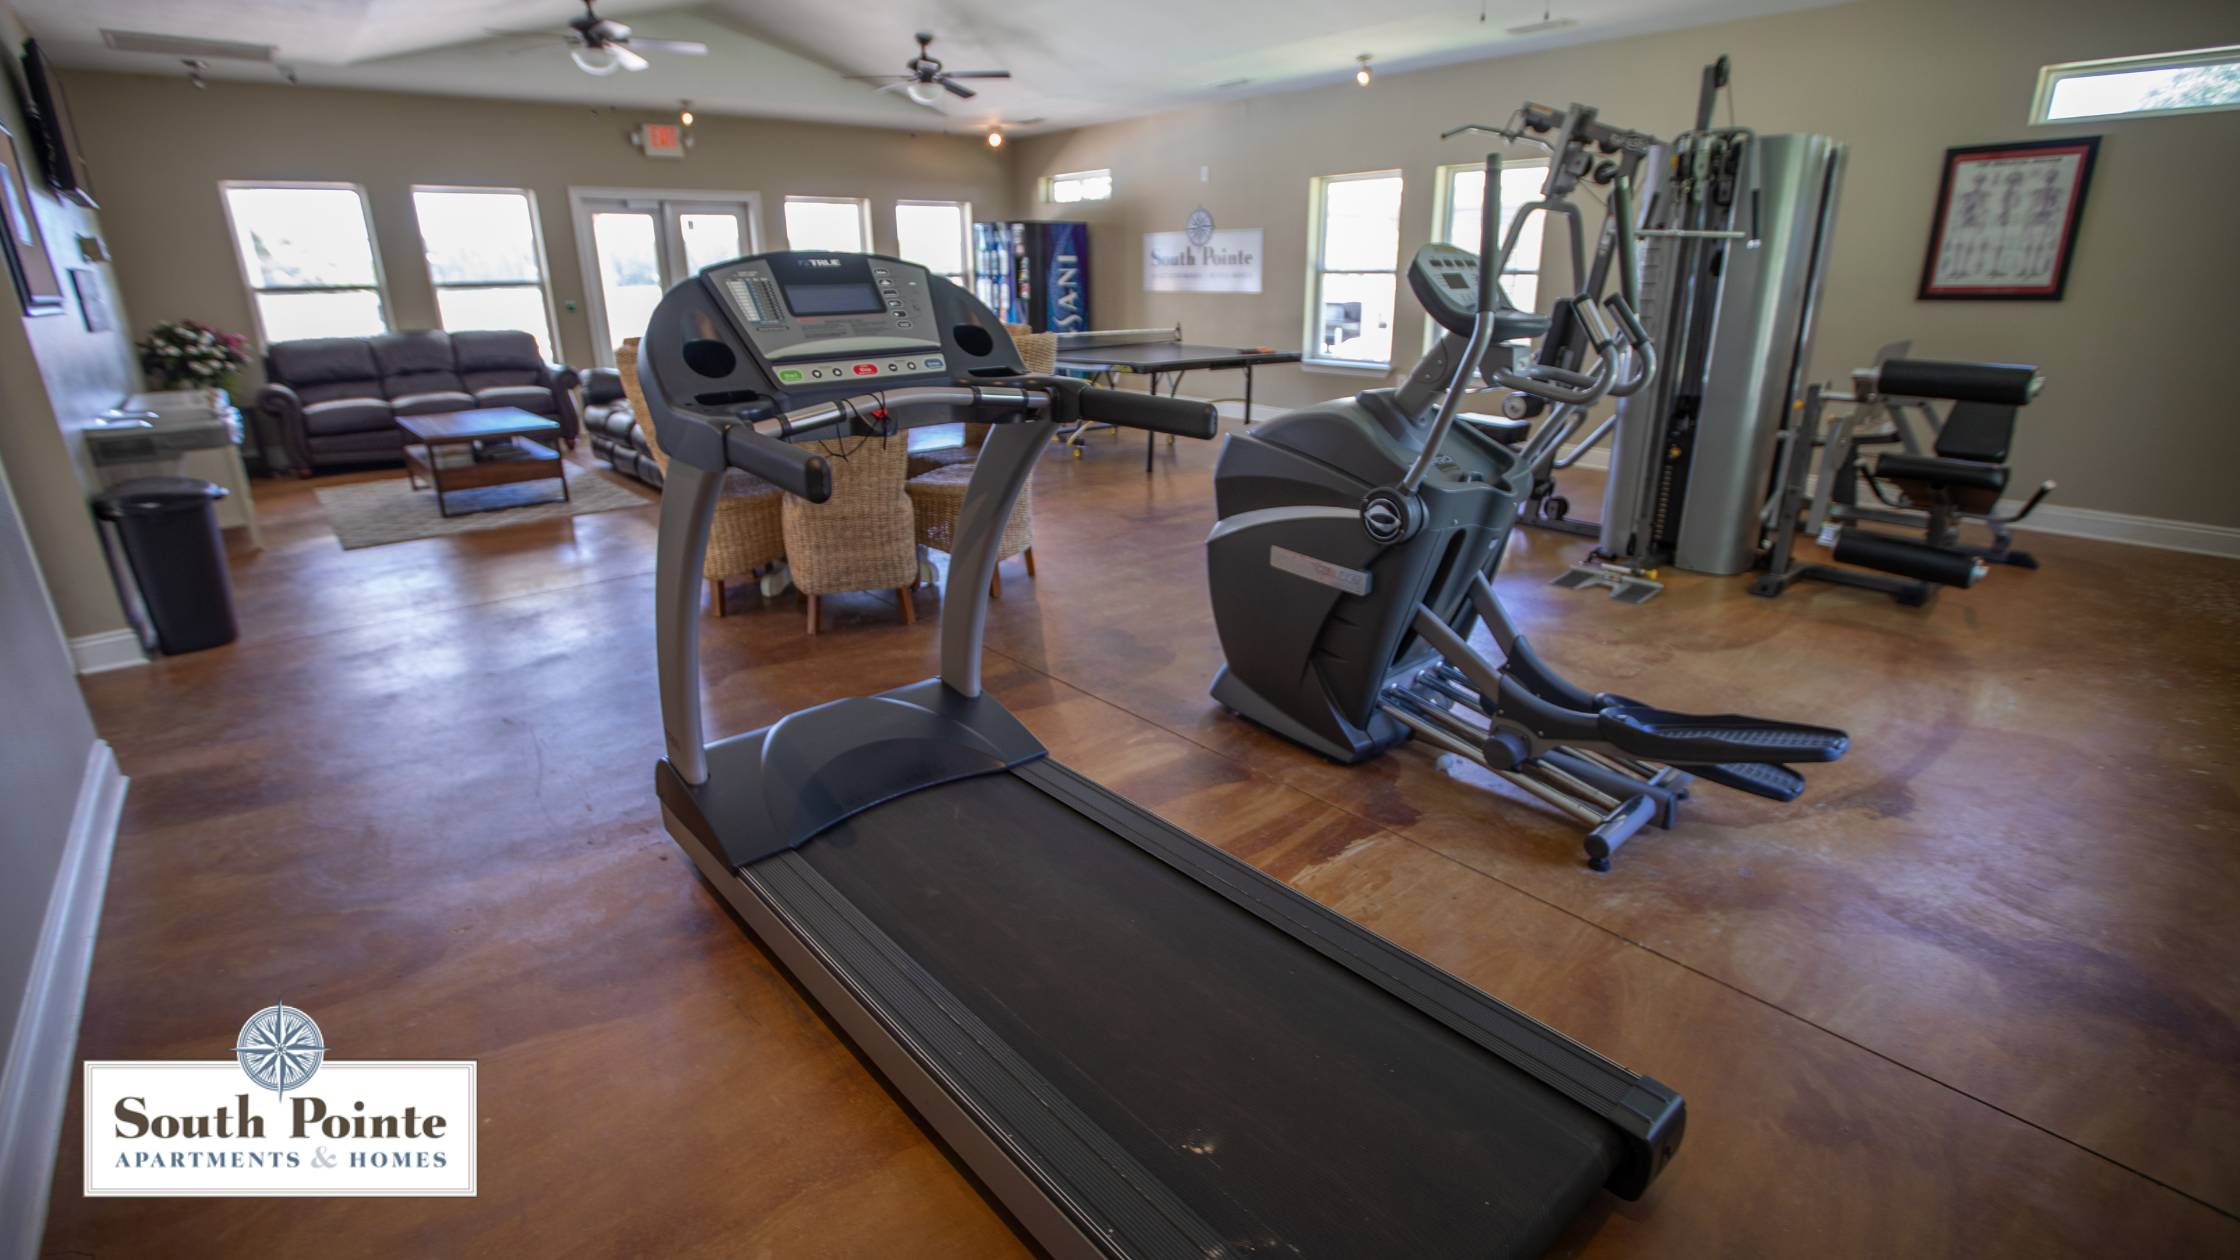 Amenities that will benefit you this spring and summer at South Pointe